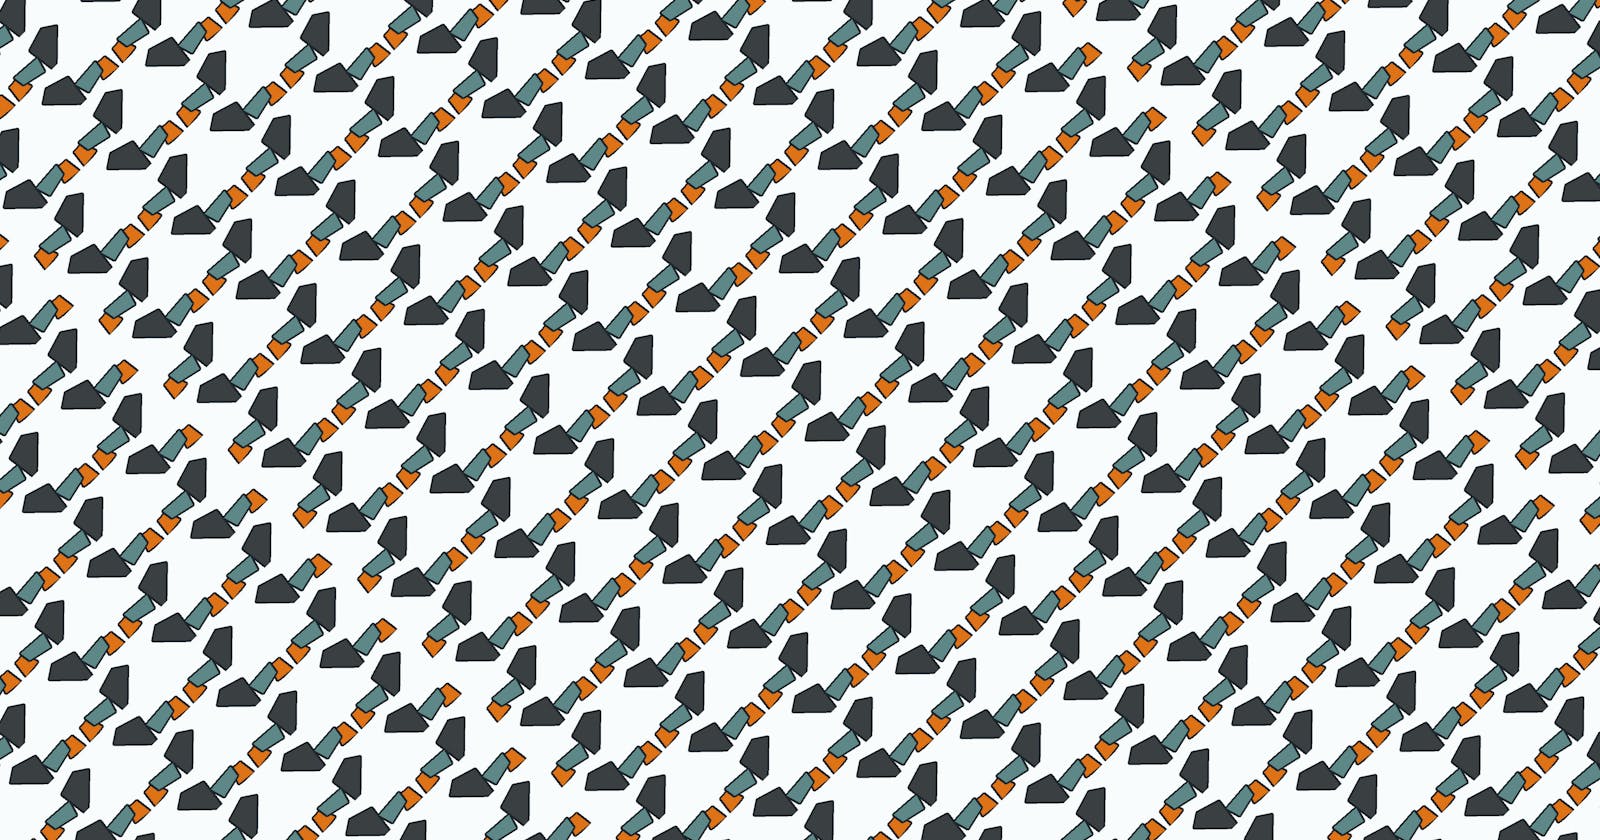 Generate Unique Non Copyrighted 4k Pattern Art Image on each page refresh